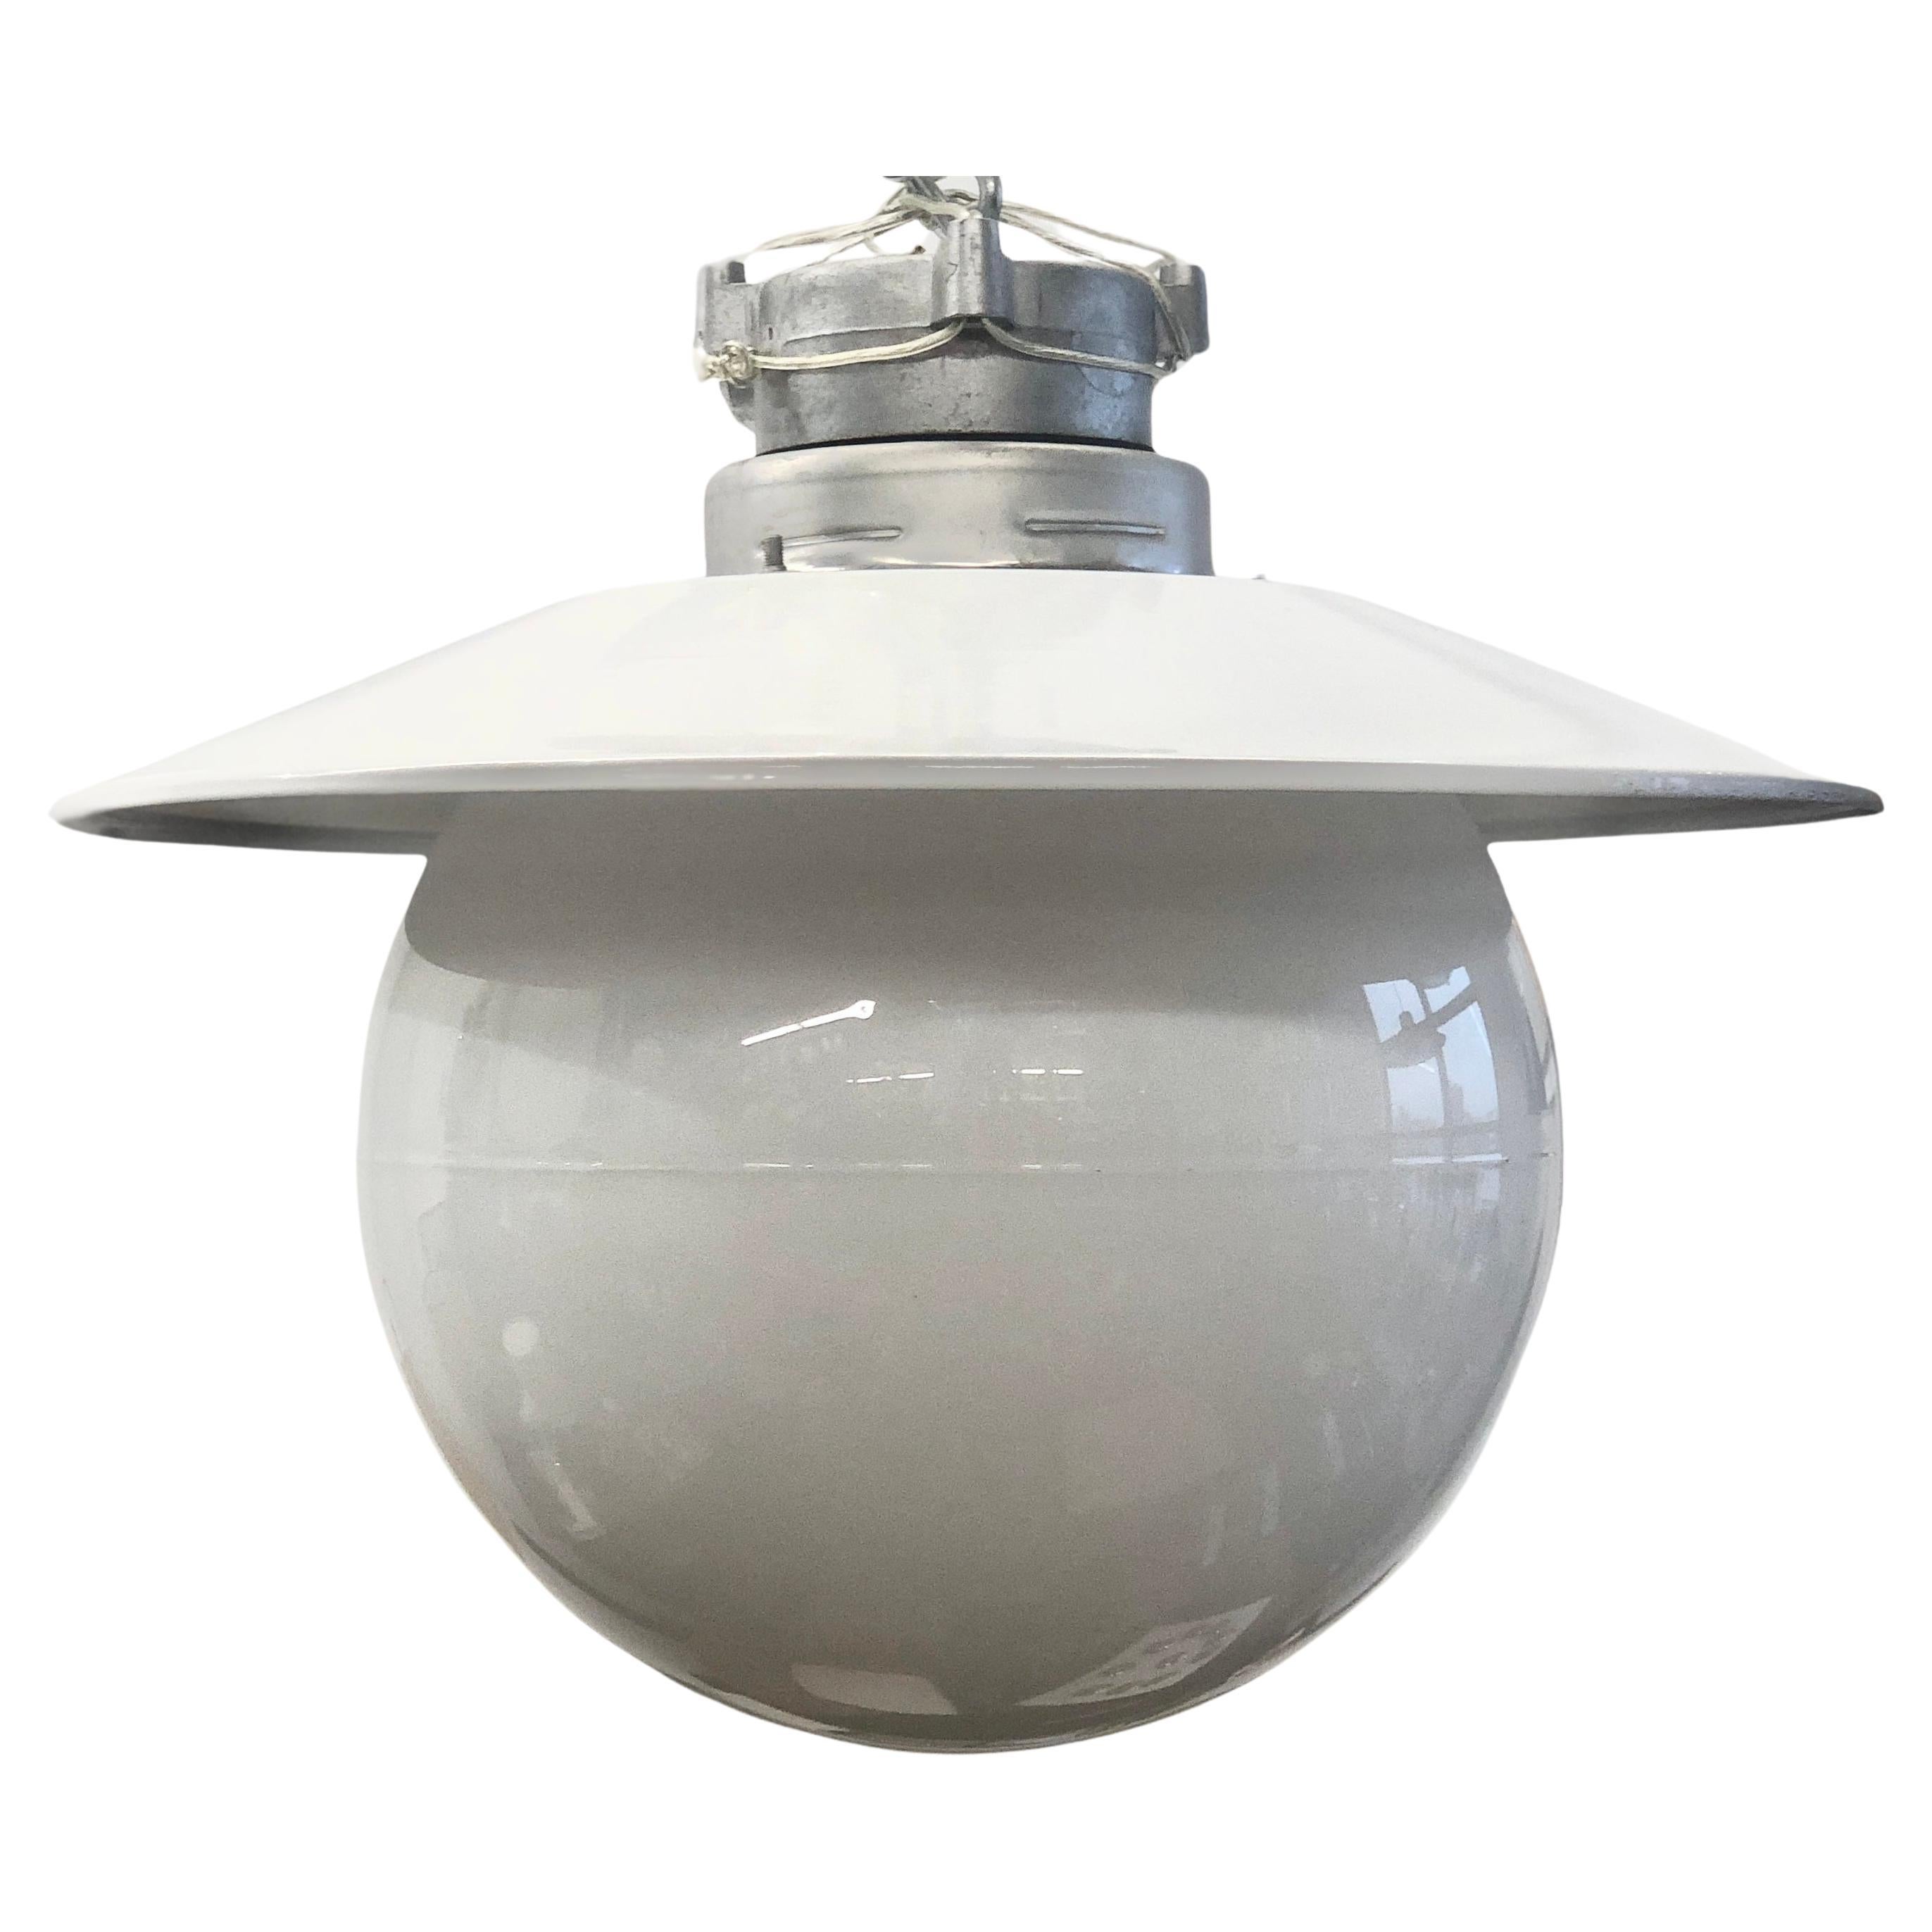 Ceiling light by Paavo Tynell model H10-100 Idman / 2 available